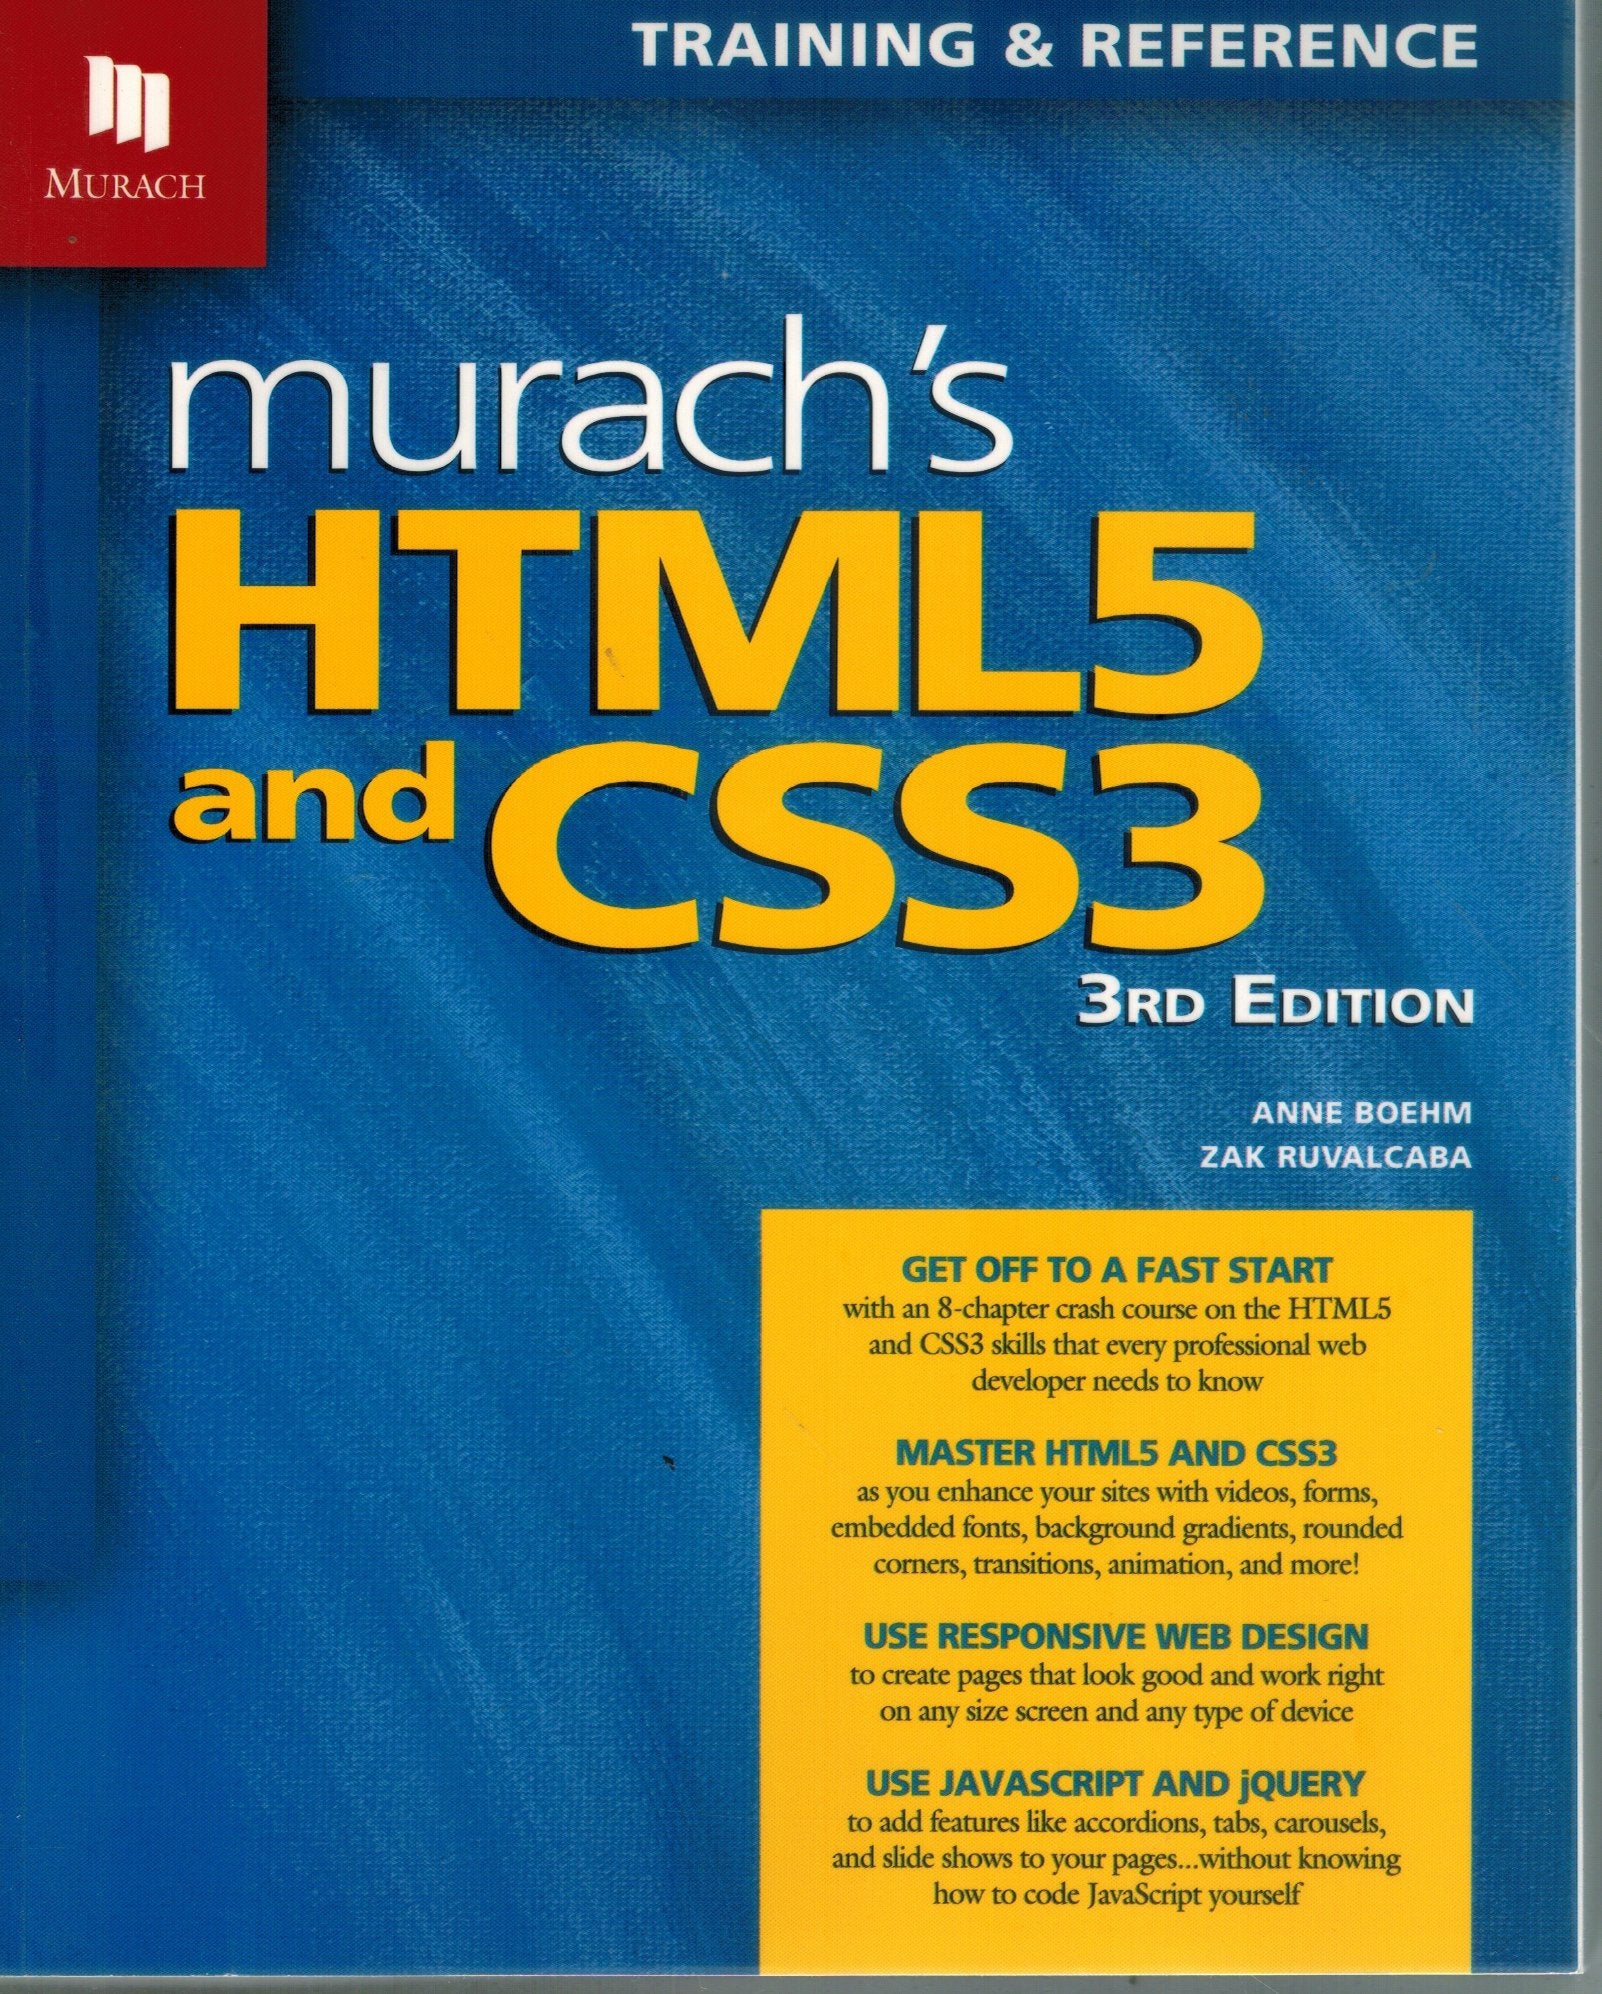 MURACH'S HTML5 AND CSS3, 3RD EDITION - books-new